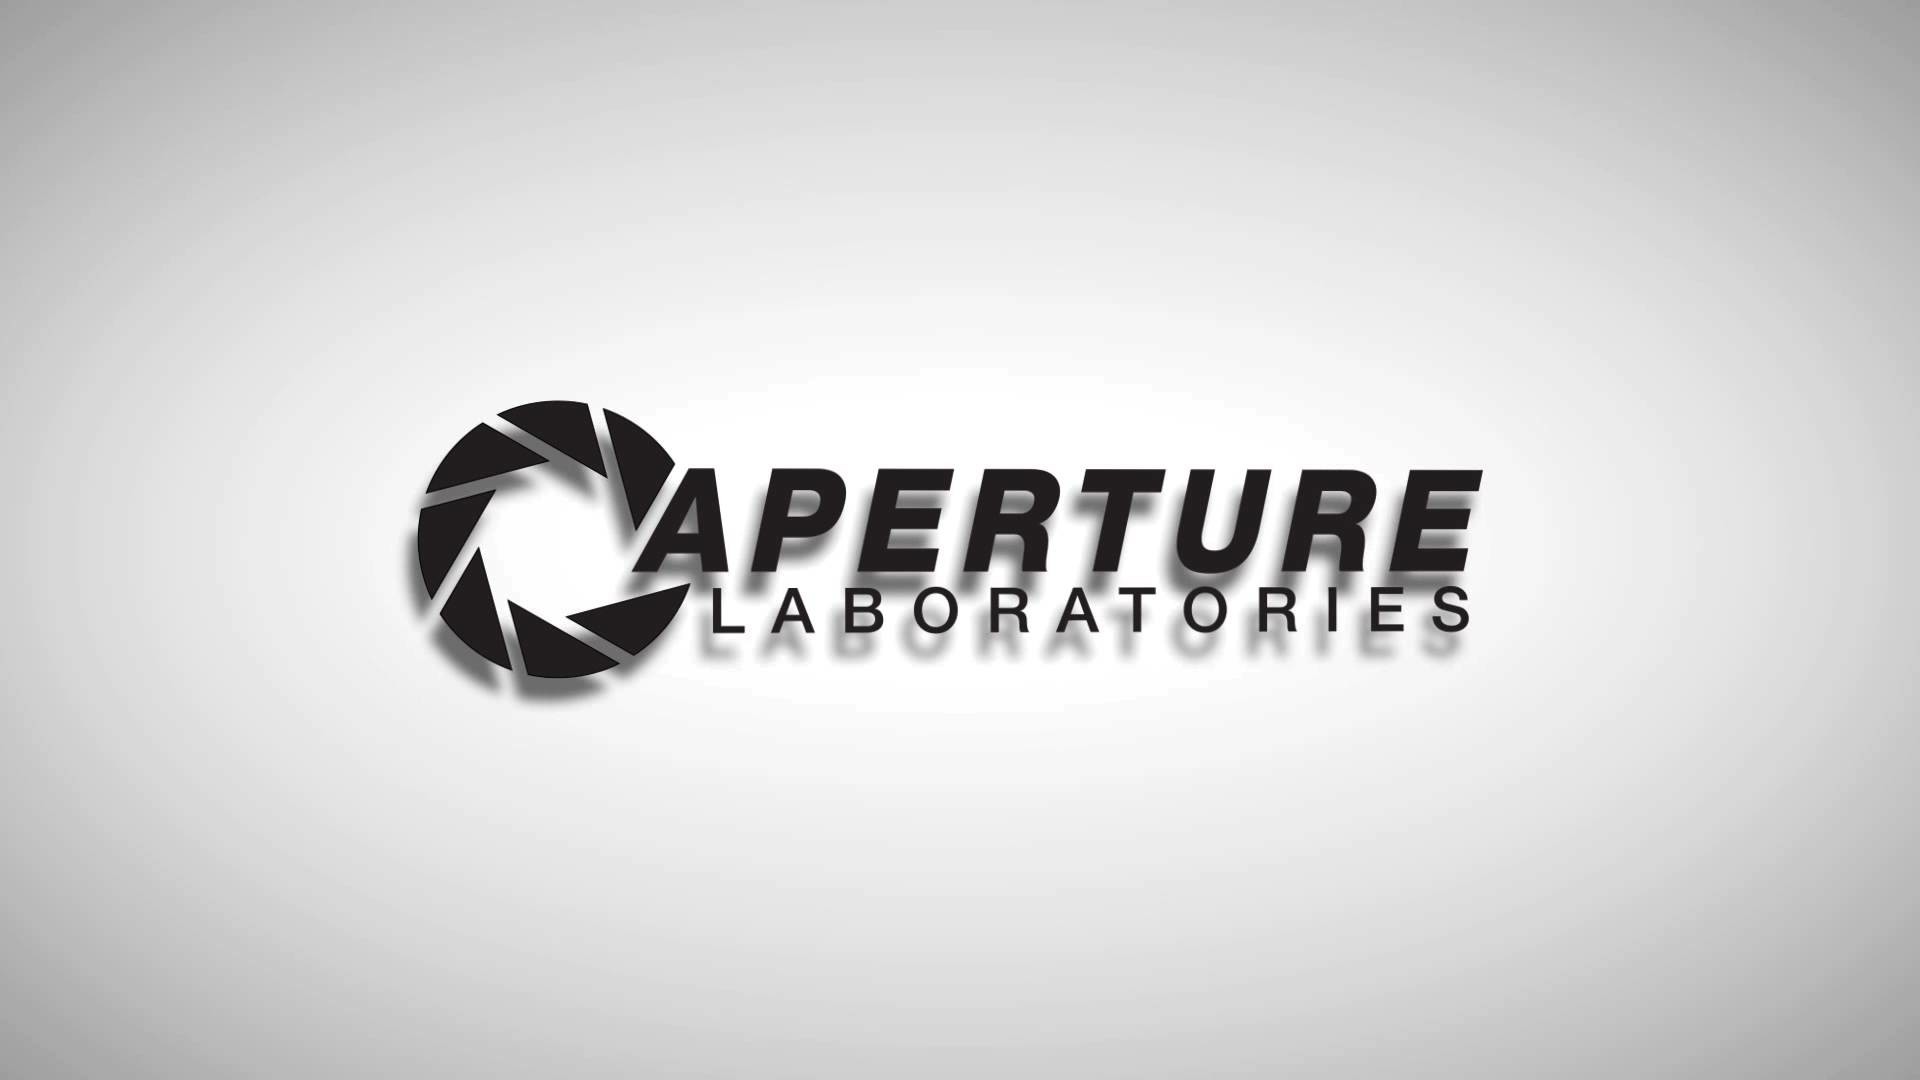 1920x1080 Wallpapers For > Aperture Science Wallpaper 1366x768